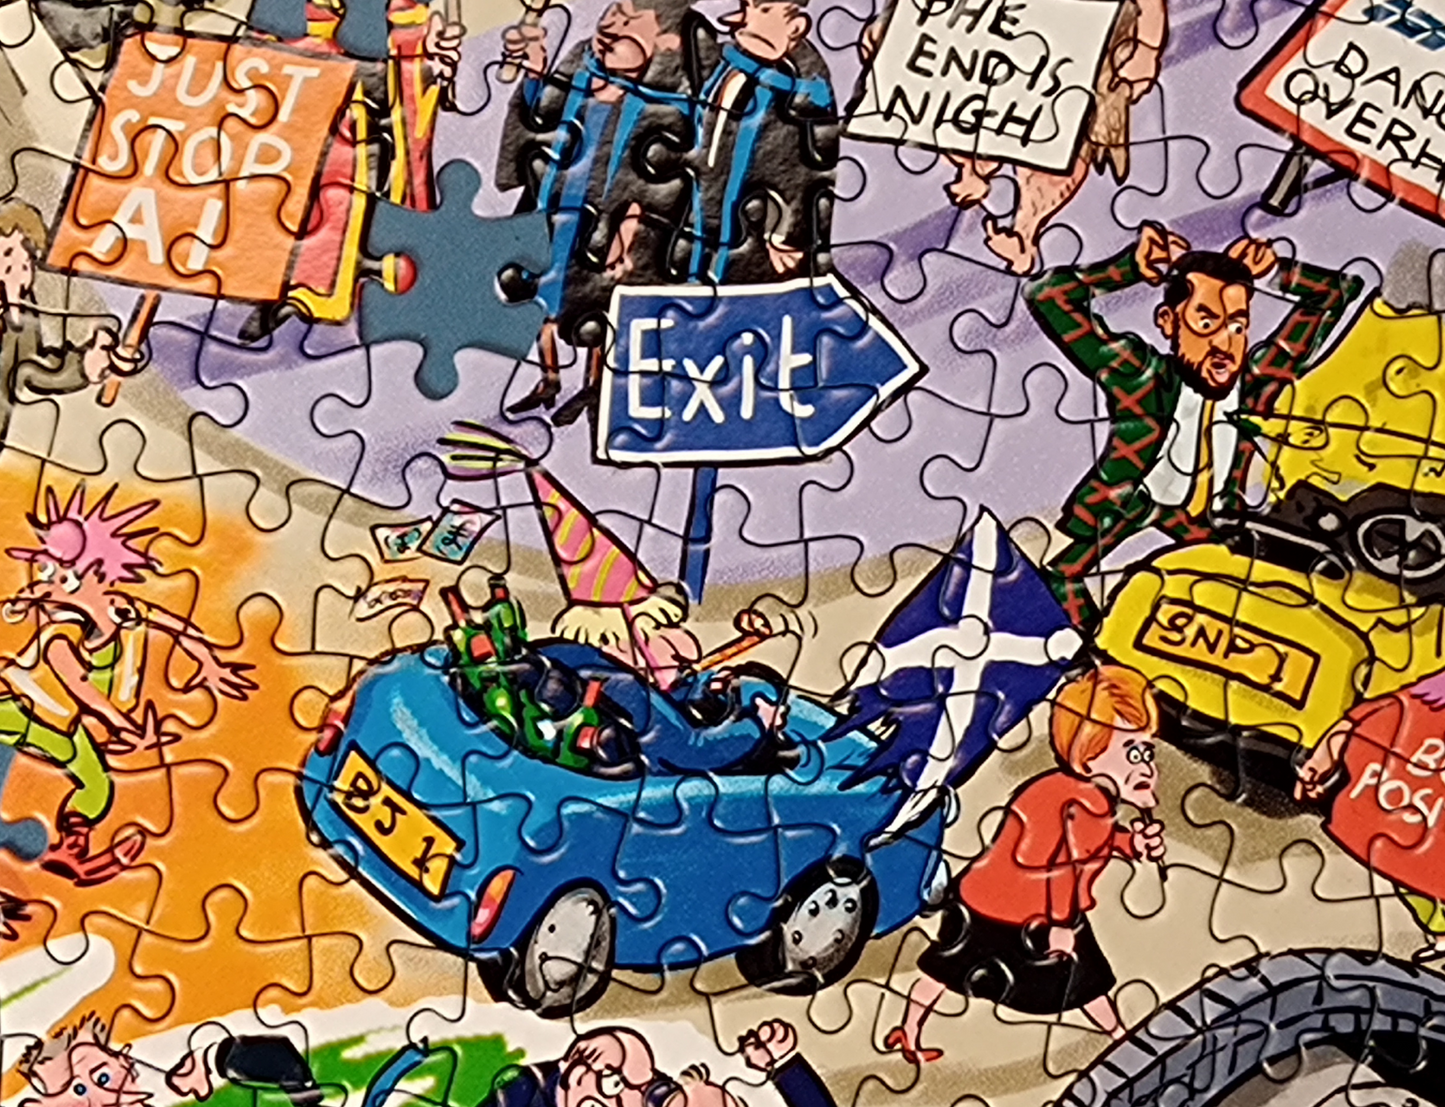 2023 According to Blower 1000 Piece Jigsaw Puzzle